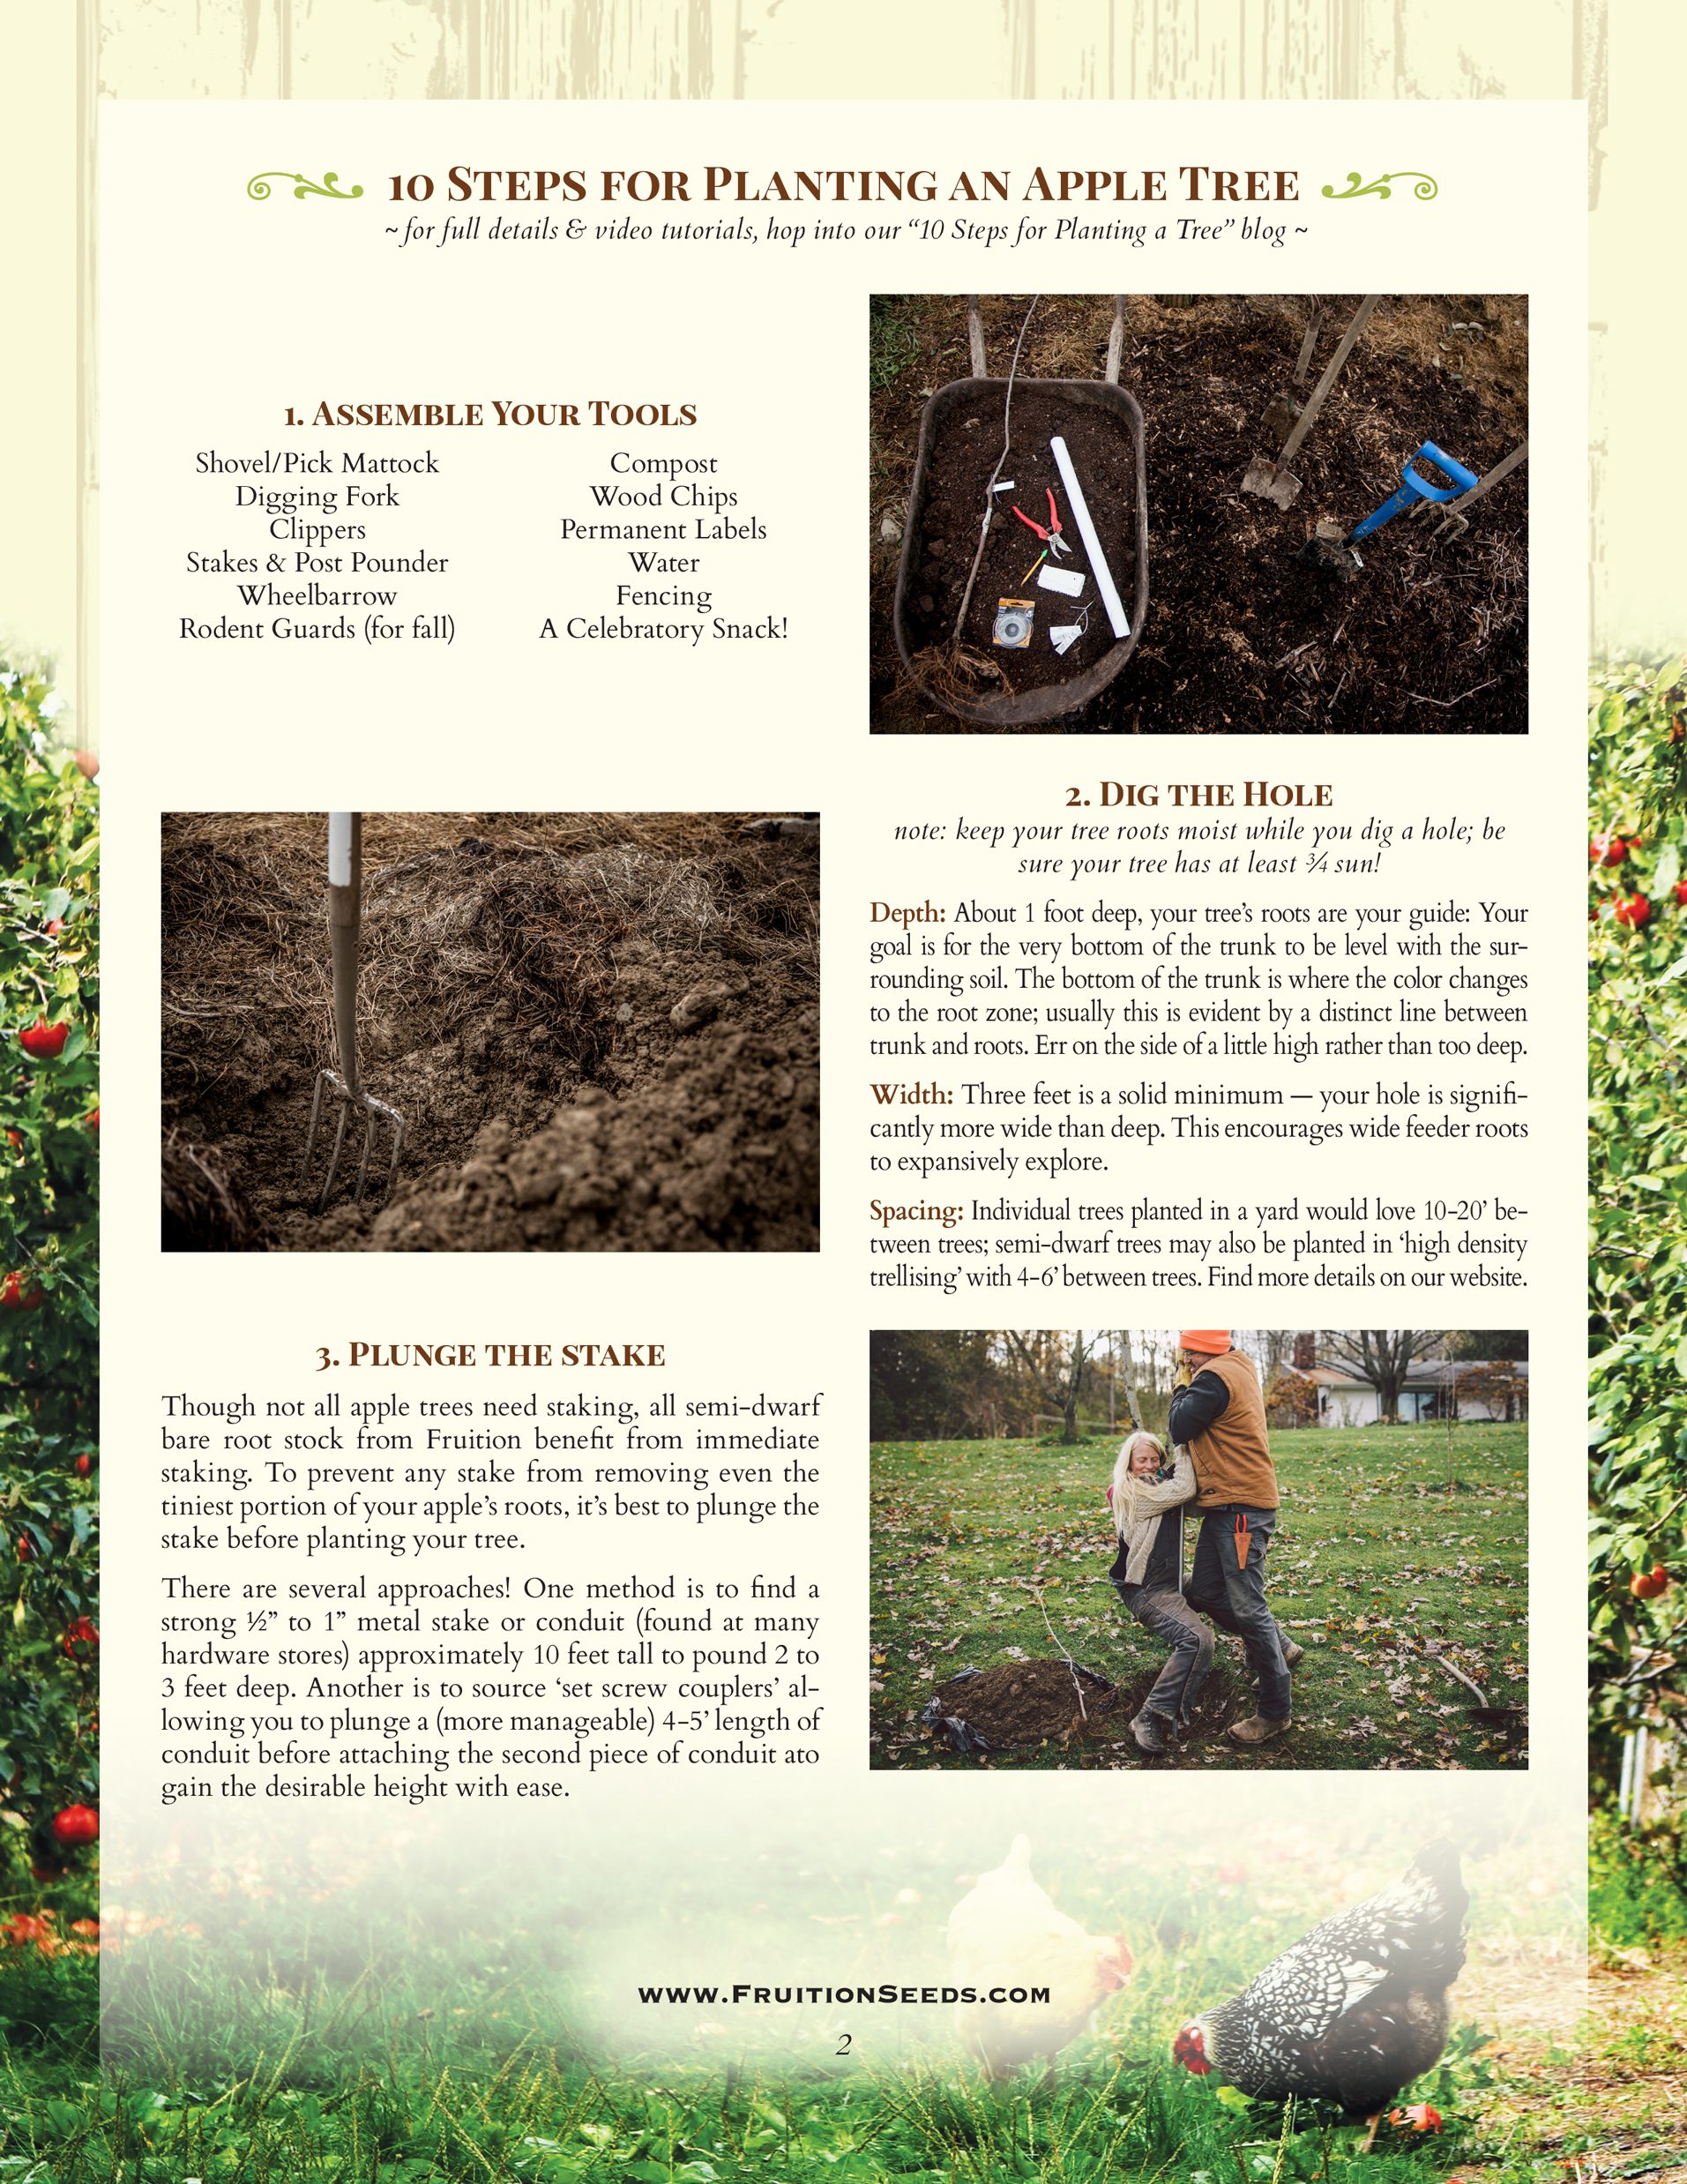 https://www.fruitionseeds.com/wp-content/uploads/Growing-Guide-Apple-Trees-pg2.jpg